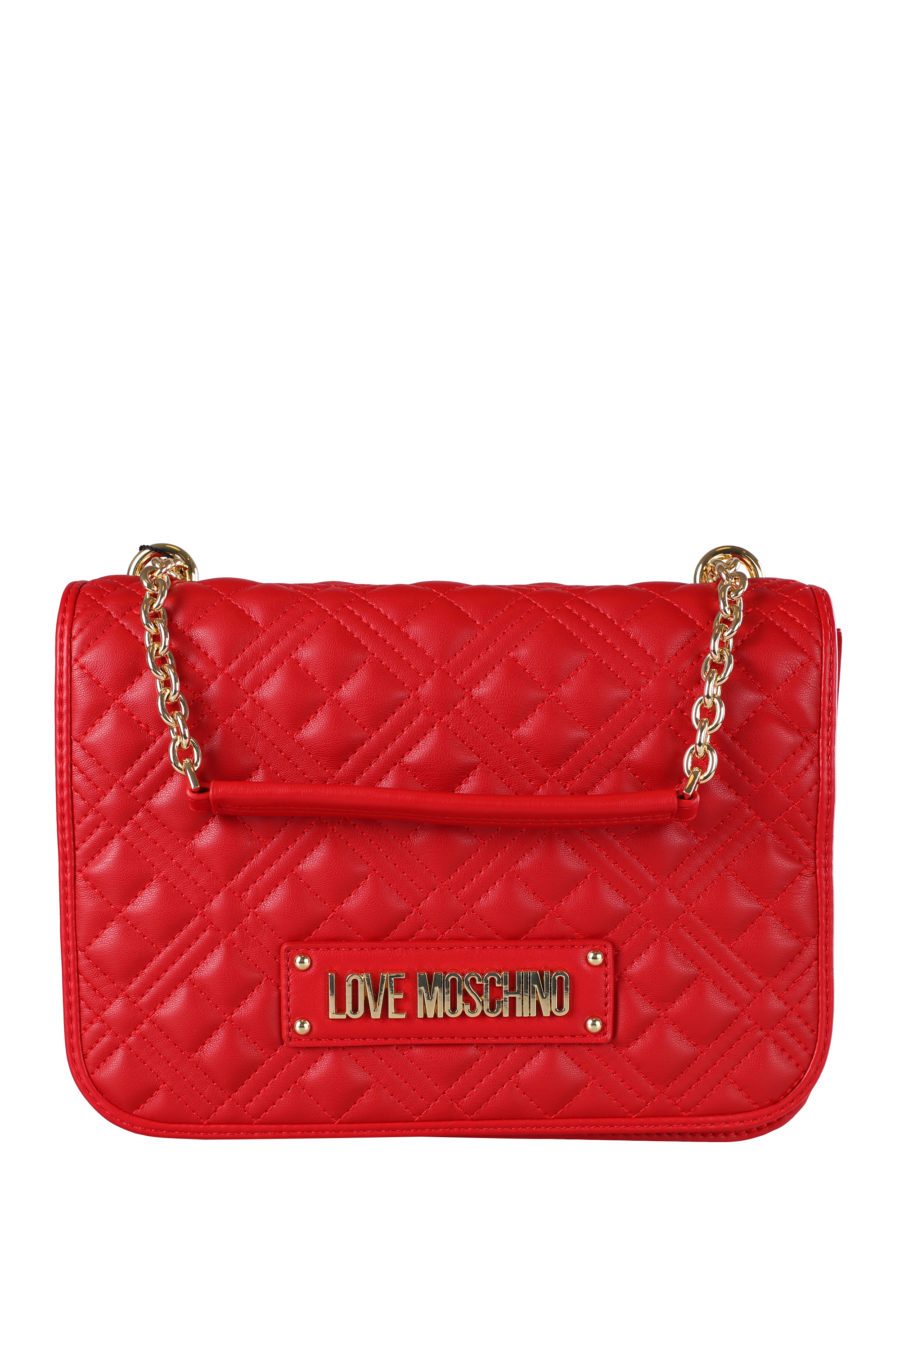 Red quilted bag with golden chain - IMG 4679